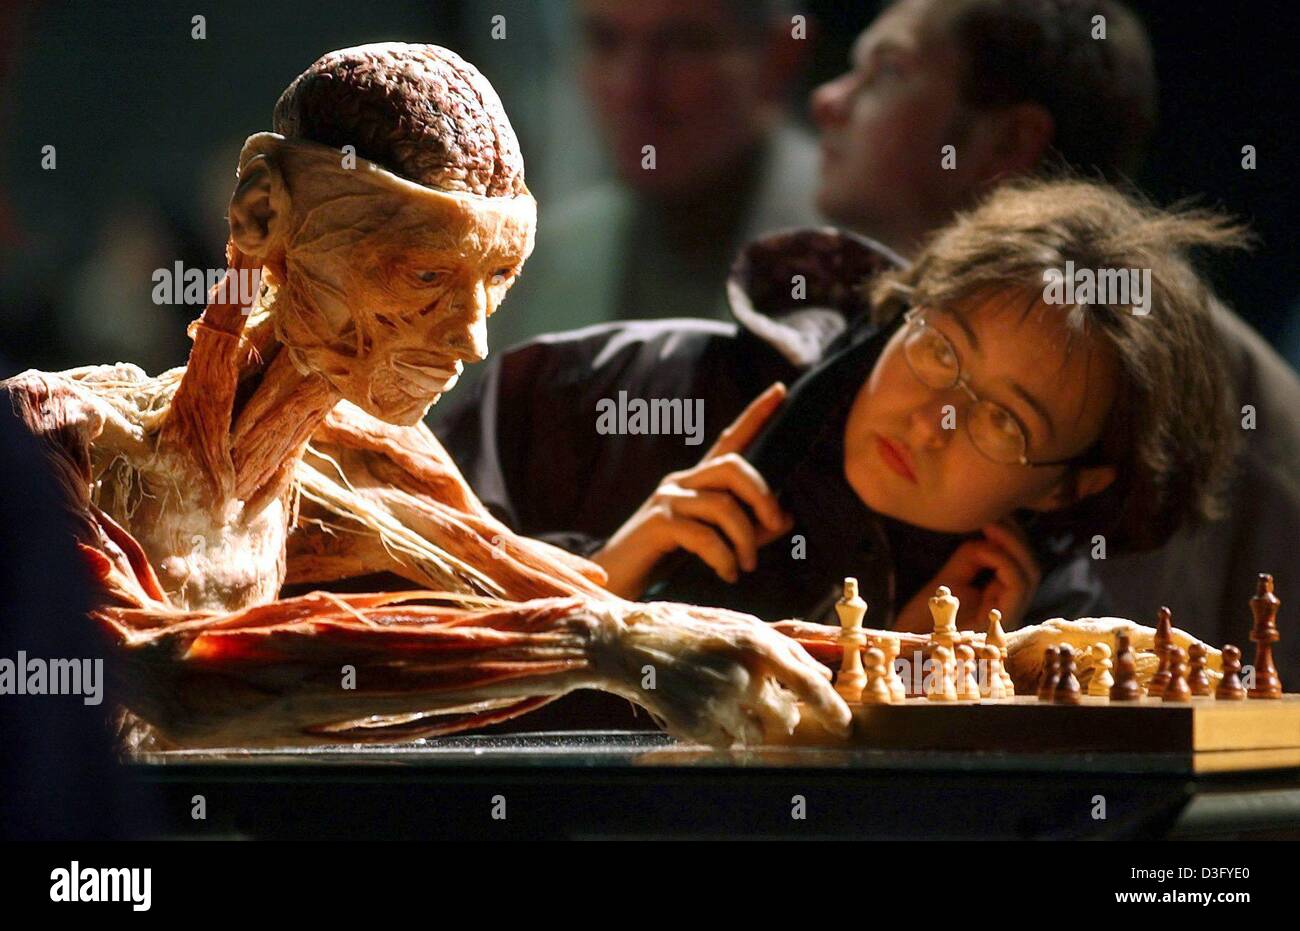 (dpa) - A visitor looks at an exhibit at the Body World exhibition in Munich, Germany, 23 February 2003. After weeks of debates the Bavarian administrative court approved on 21 February 2003 of the controversial exhibition Body Worlds to exhibit in Munich. But not all of the prepared human bodies are allowed to be exhibited. Stock Photo